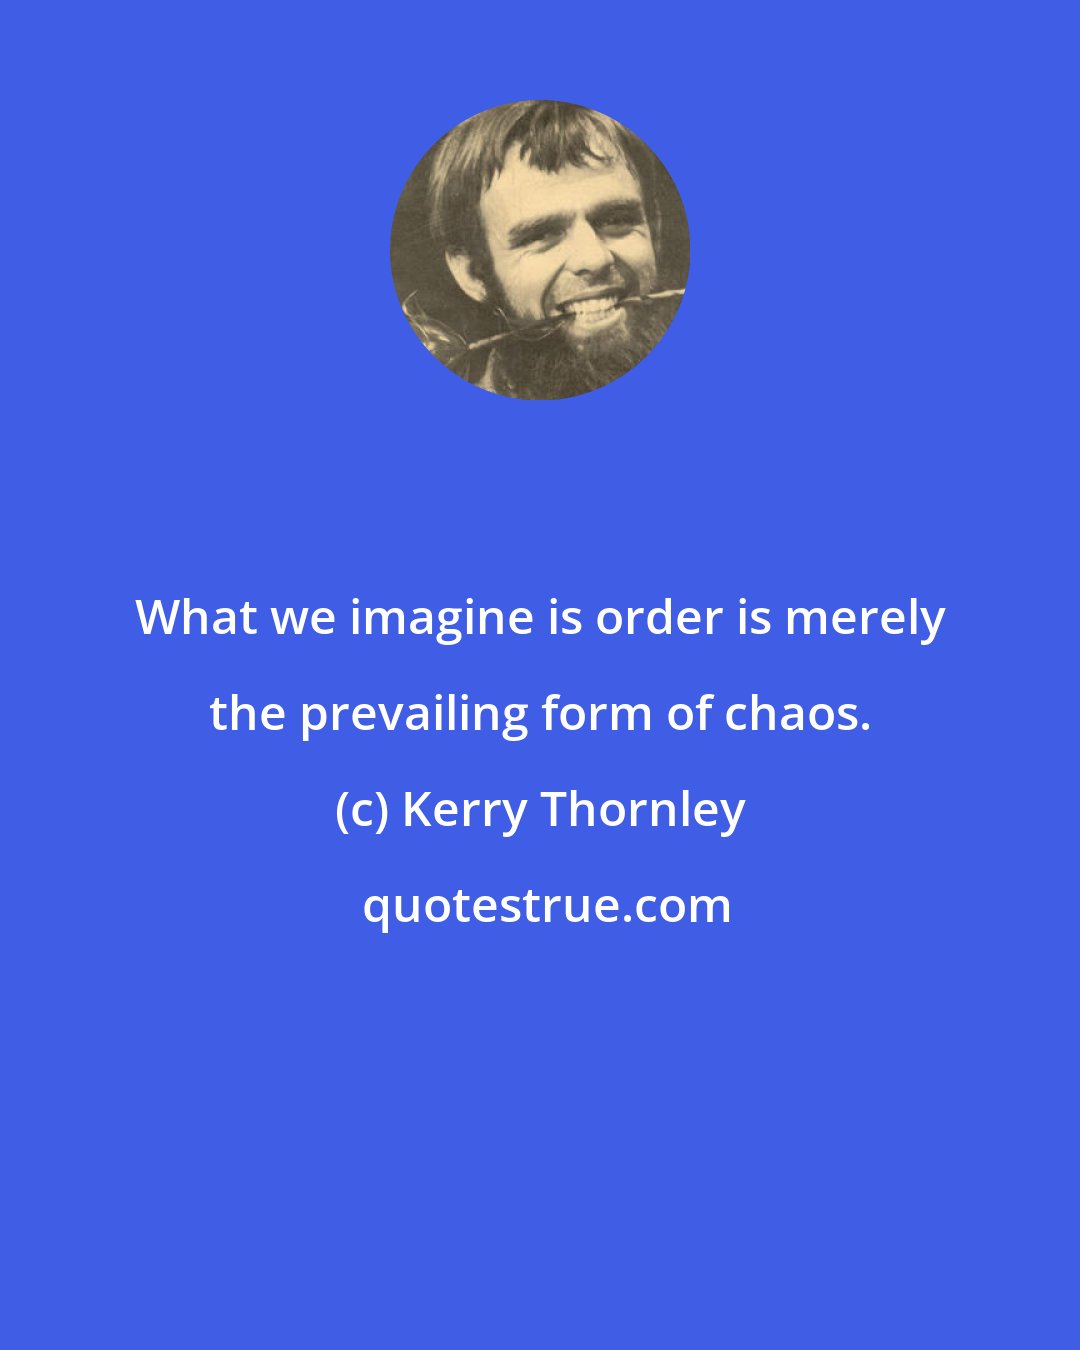 Kerry Thornley: What we imagine is order is merely the prevailing form of chaos.